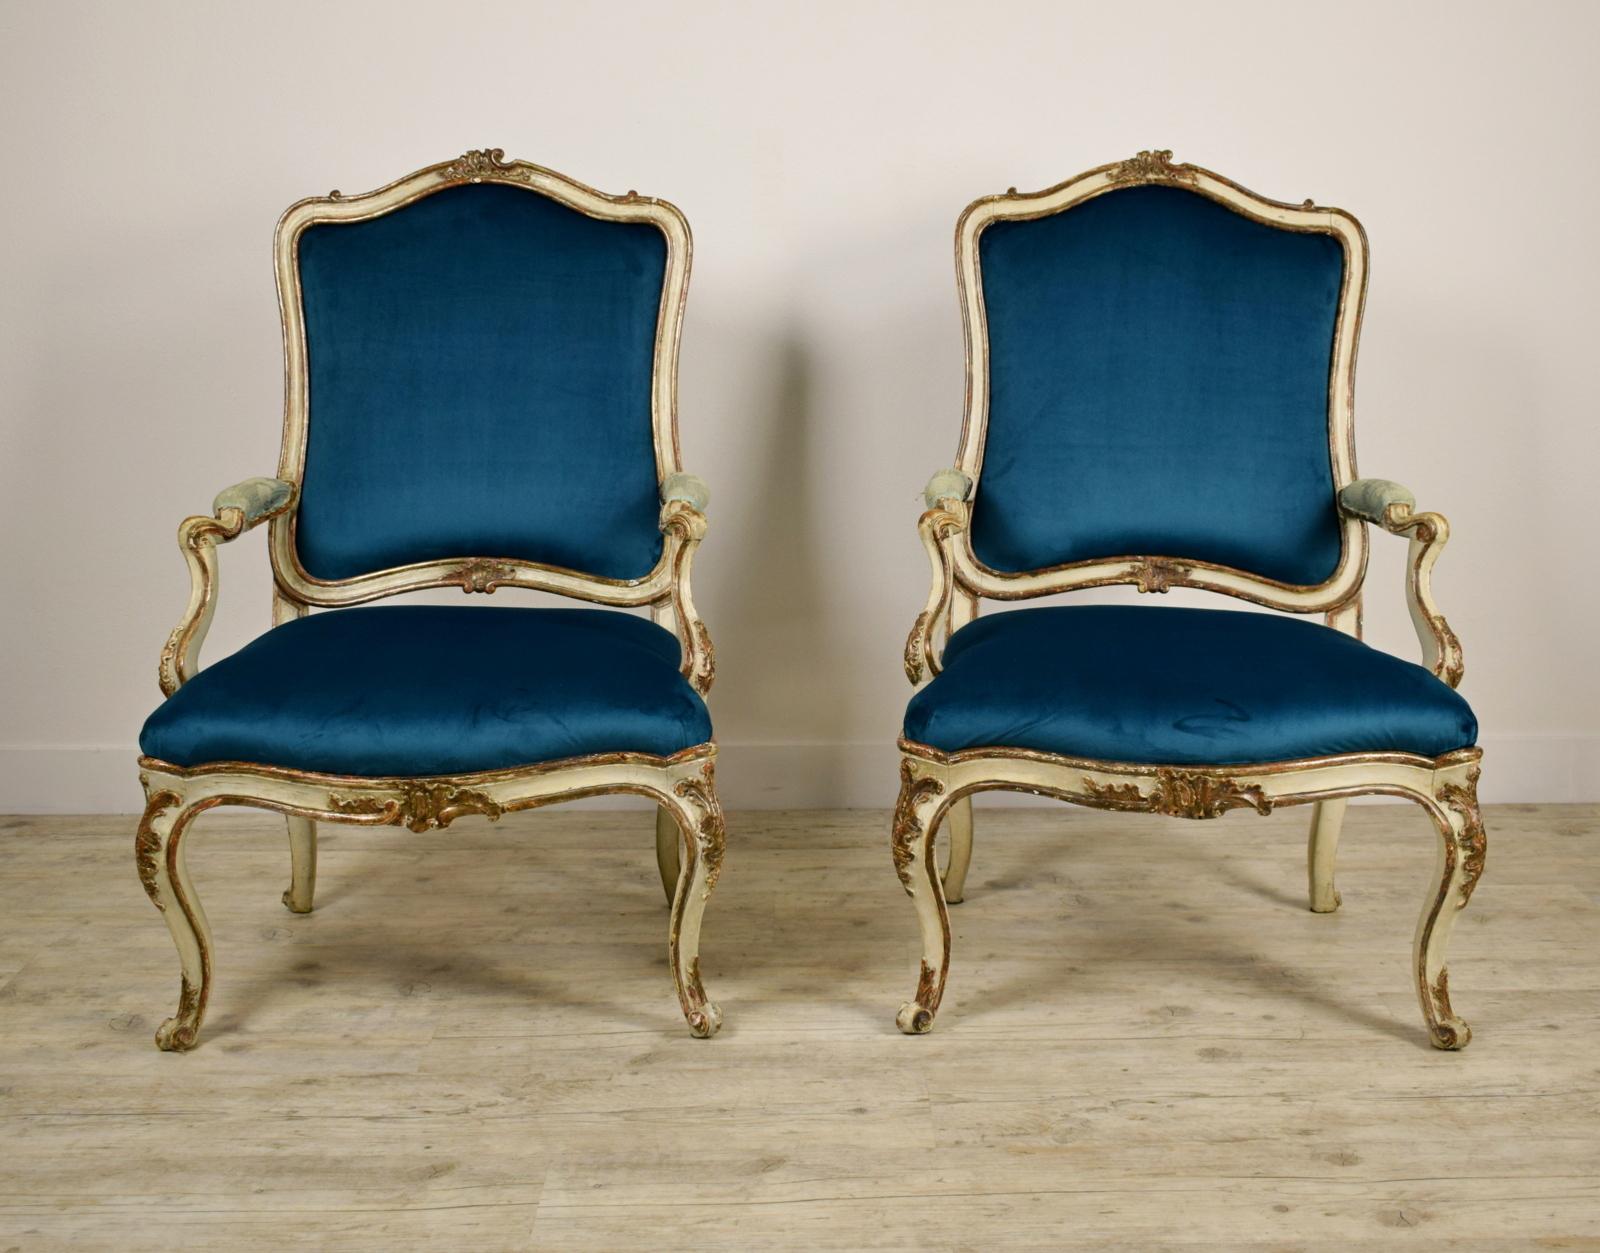 18th Century, Pair of Italian Lacquered Silver Carved Wood Armchairs 

This elegant pair of armchairs, made in the north of Italy (Piedmont) in the 18th century, has a finely carved wood structure, lacquered and silver plated.

These large Baroque